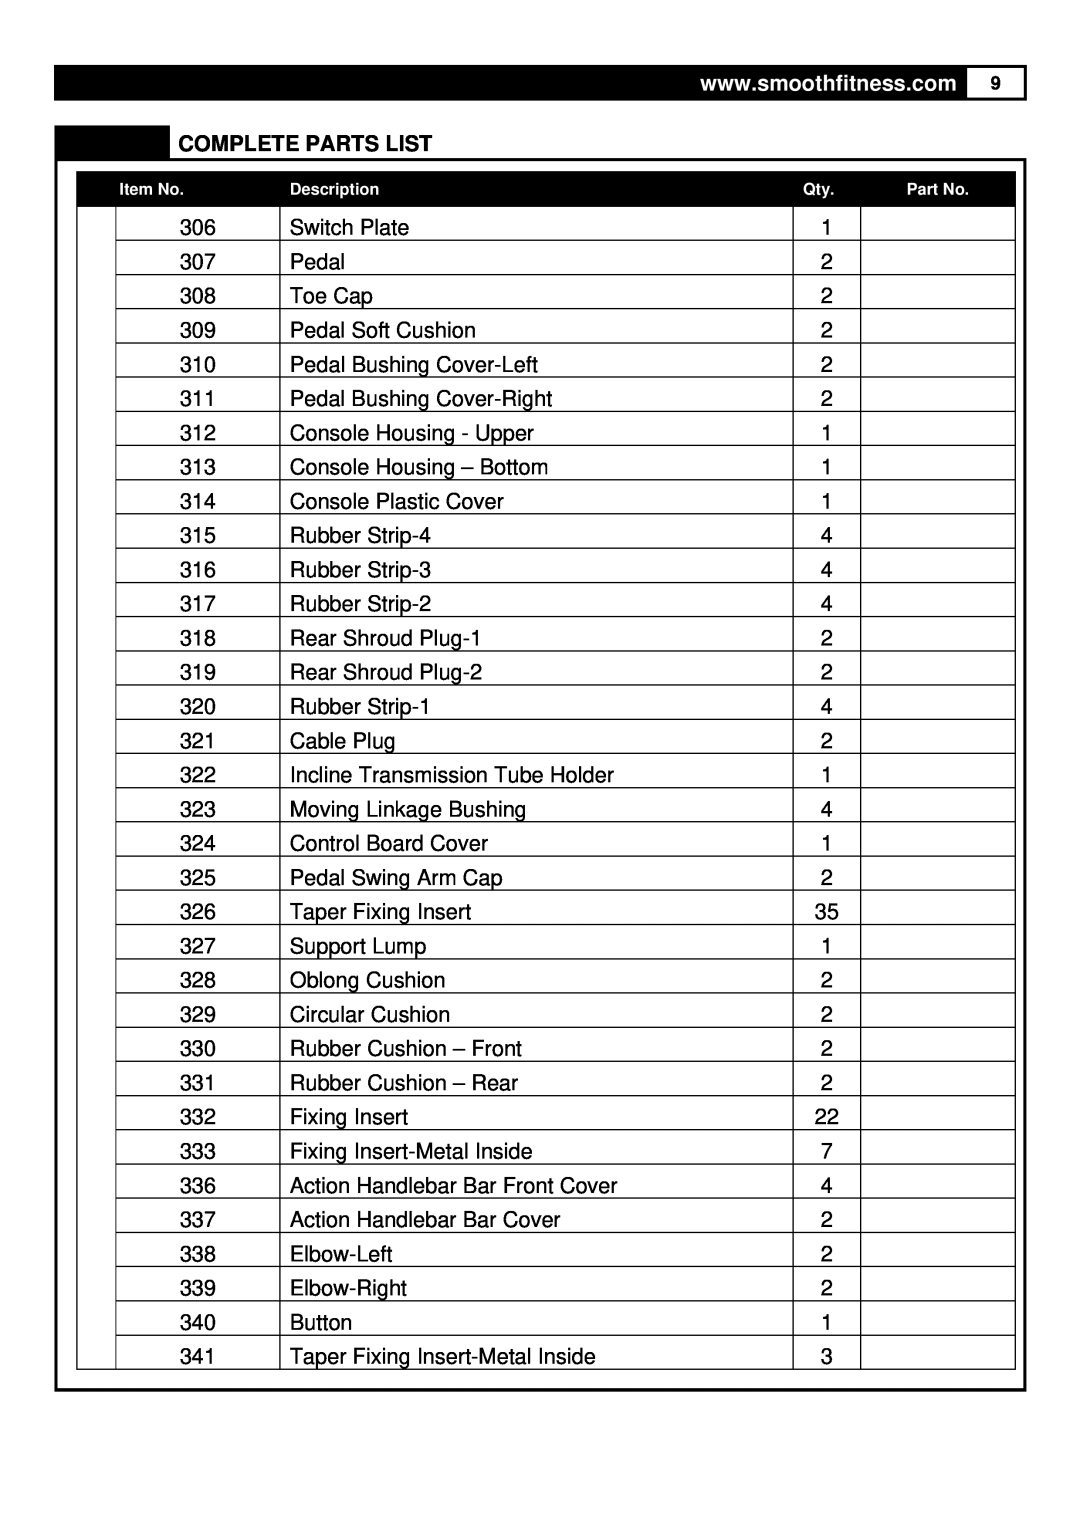 Smooth Fitness 9.25X user manual Complete Parts List, Switch Plate 